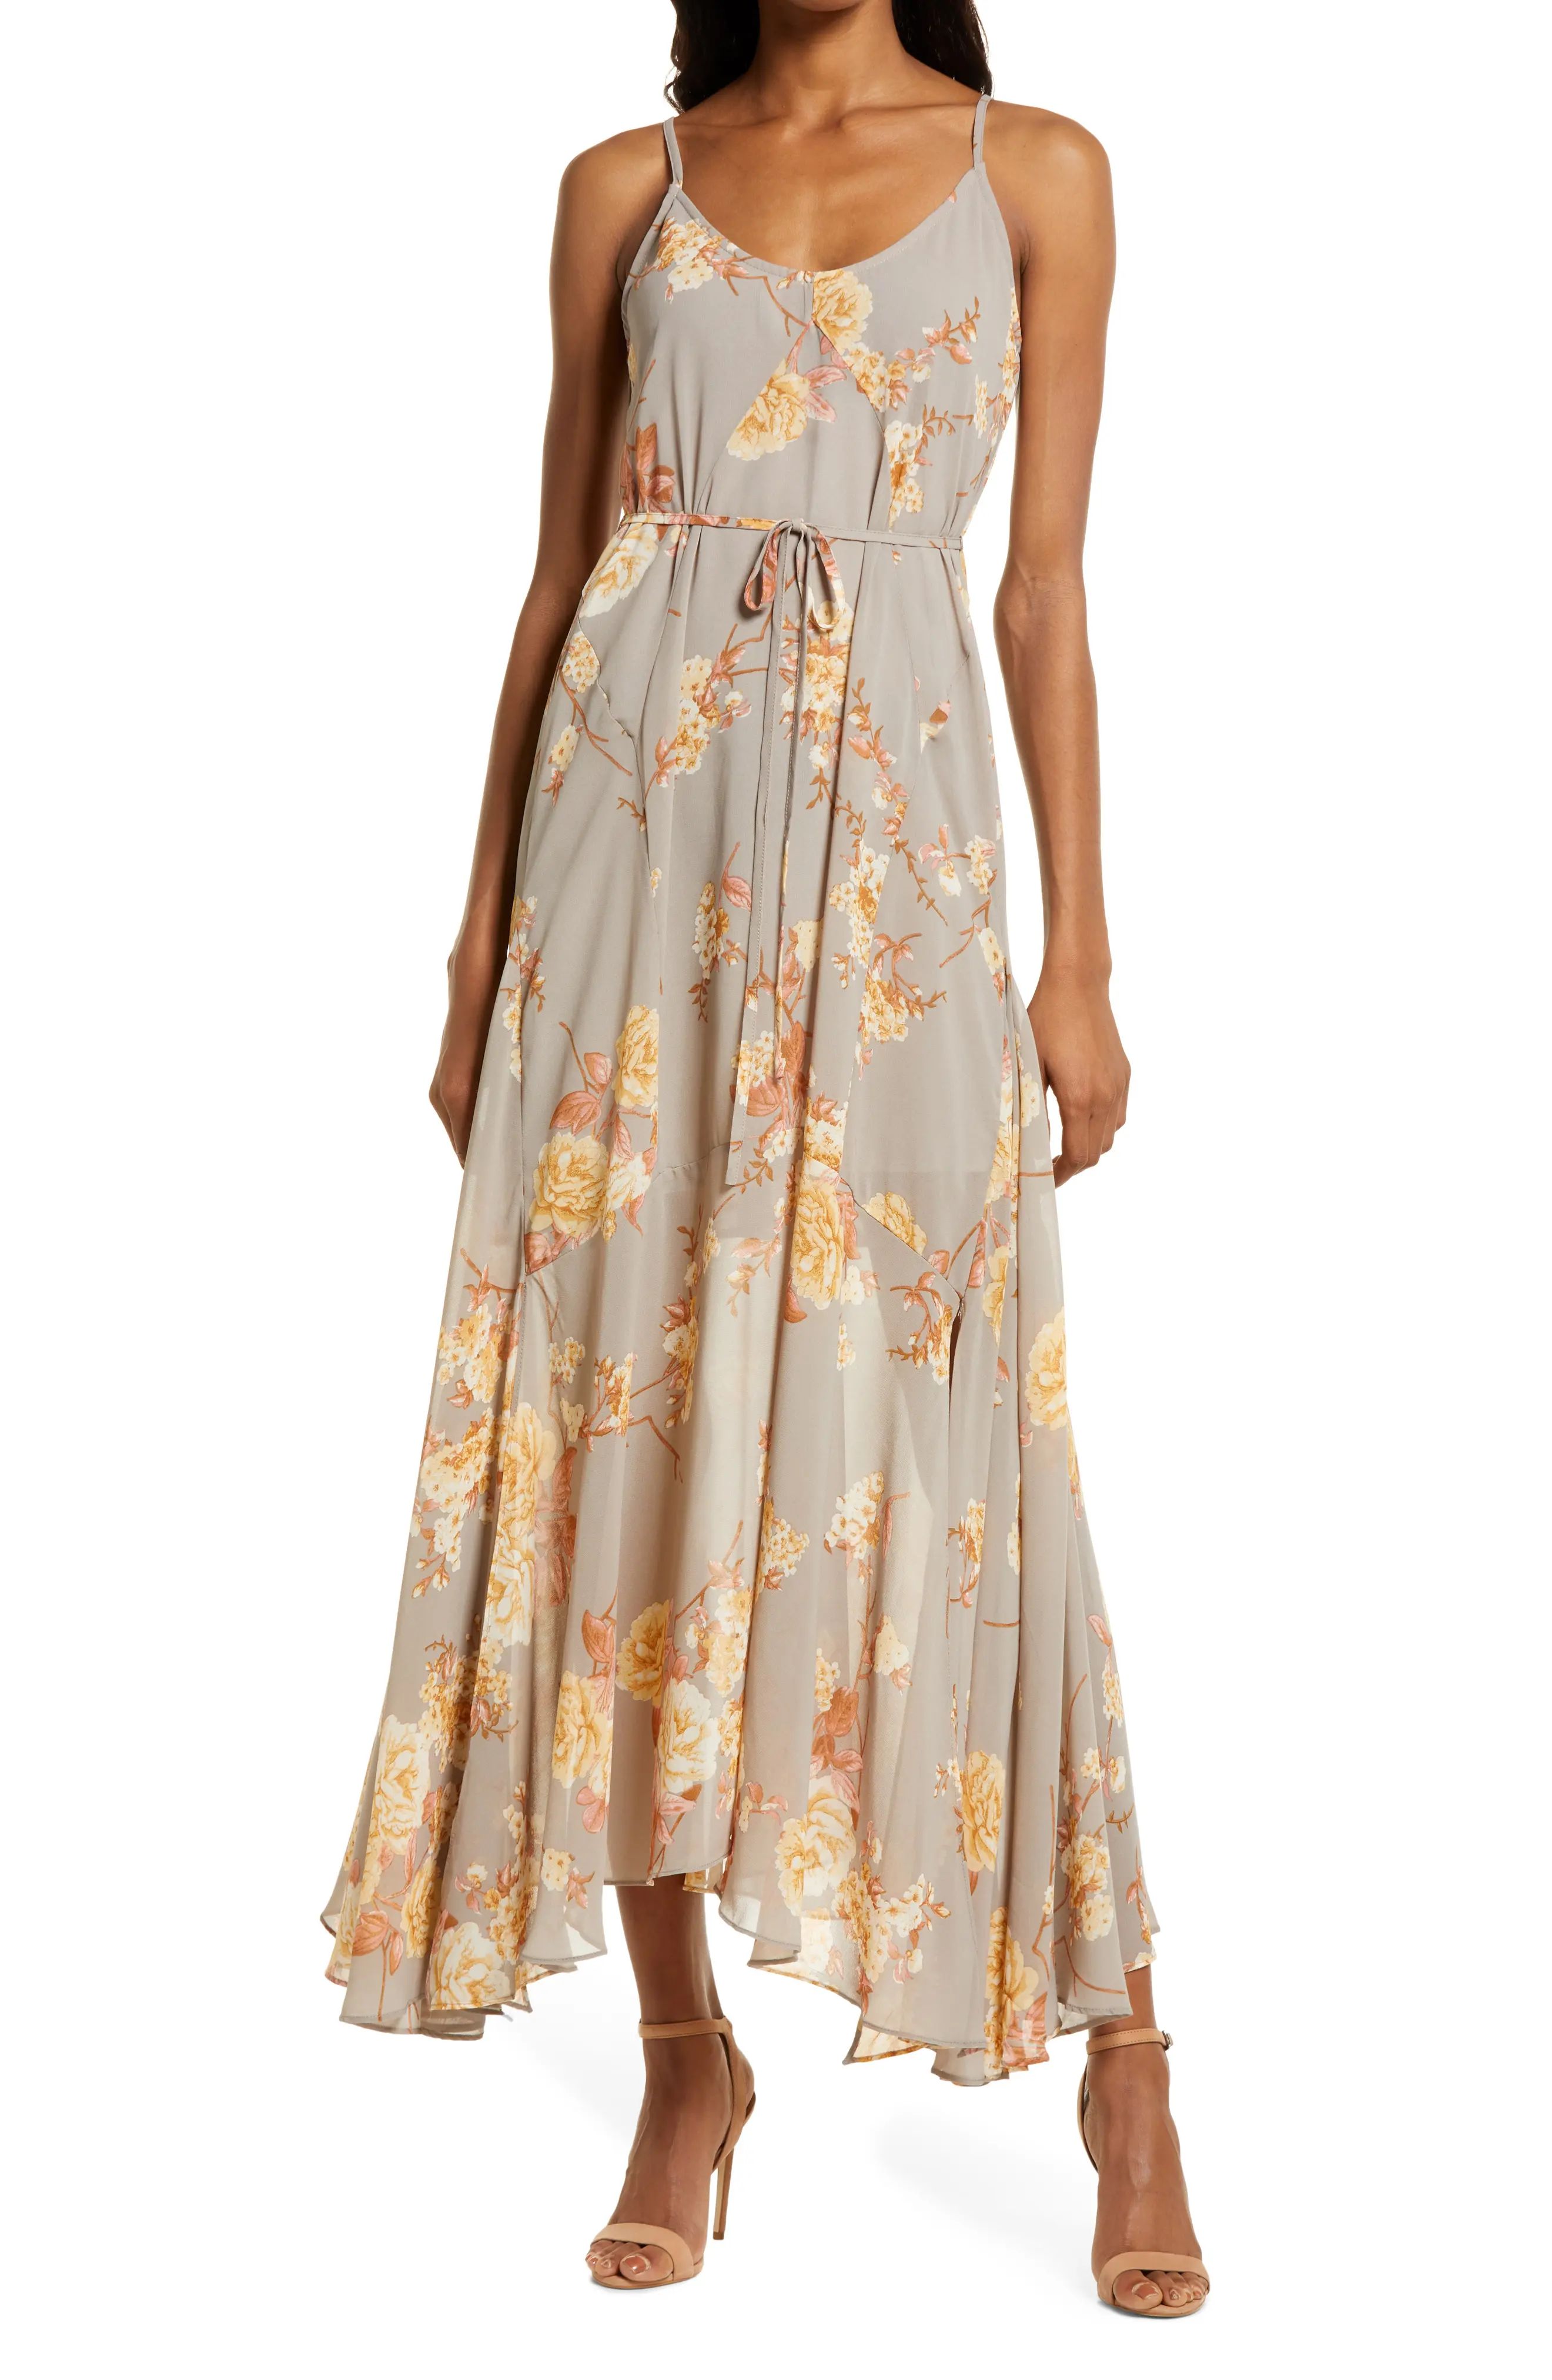 Lulus Feeling Freesia Floral Dress in Grey Floral Print at Nordstrom, Size Small | Nordstrom